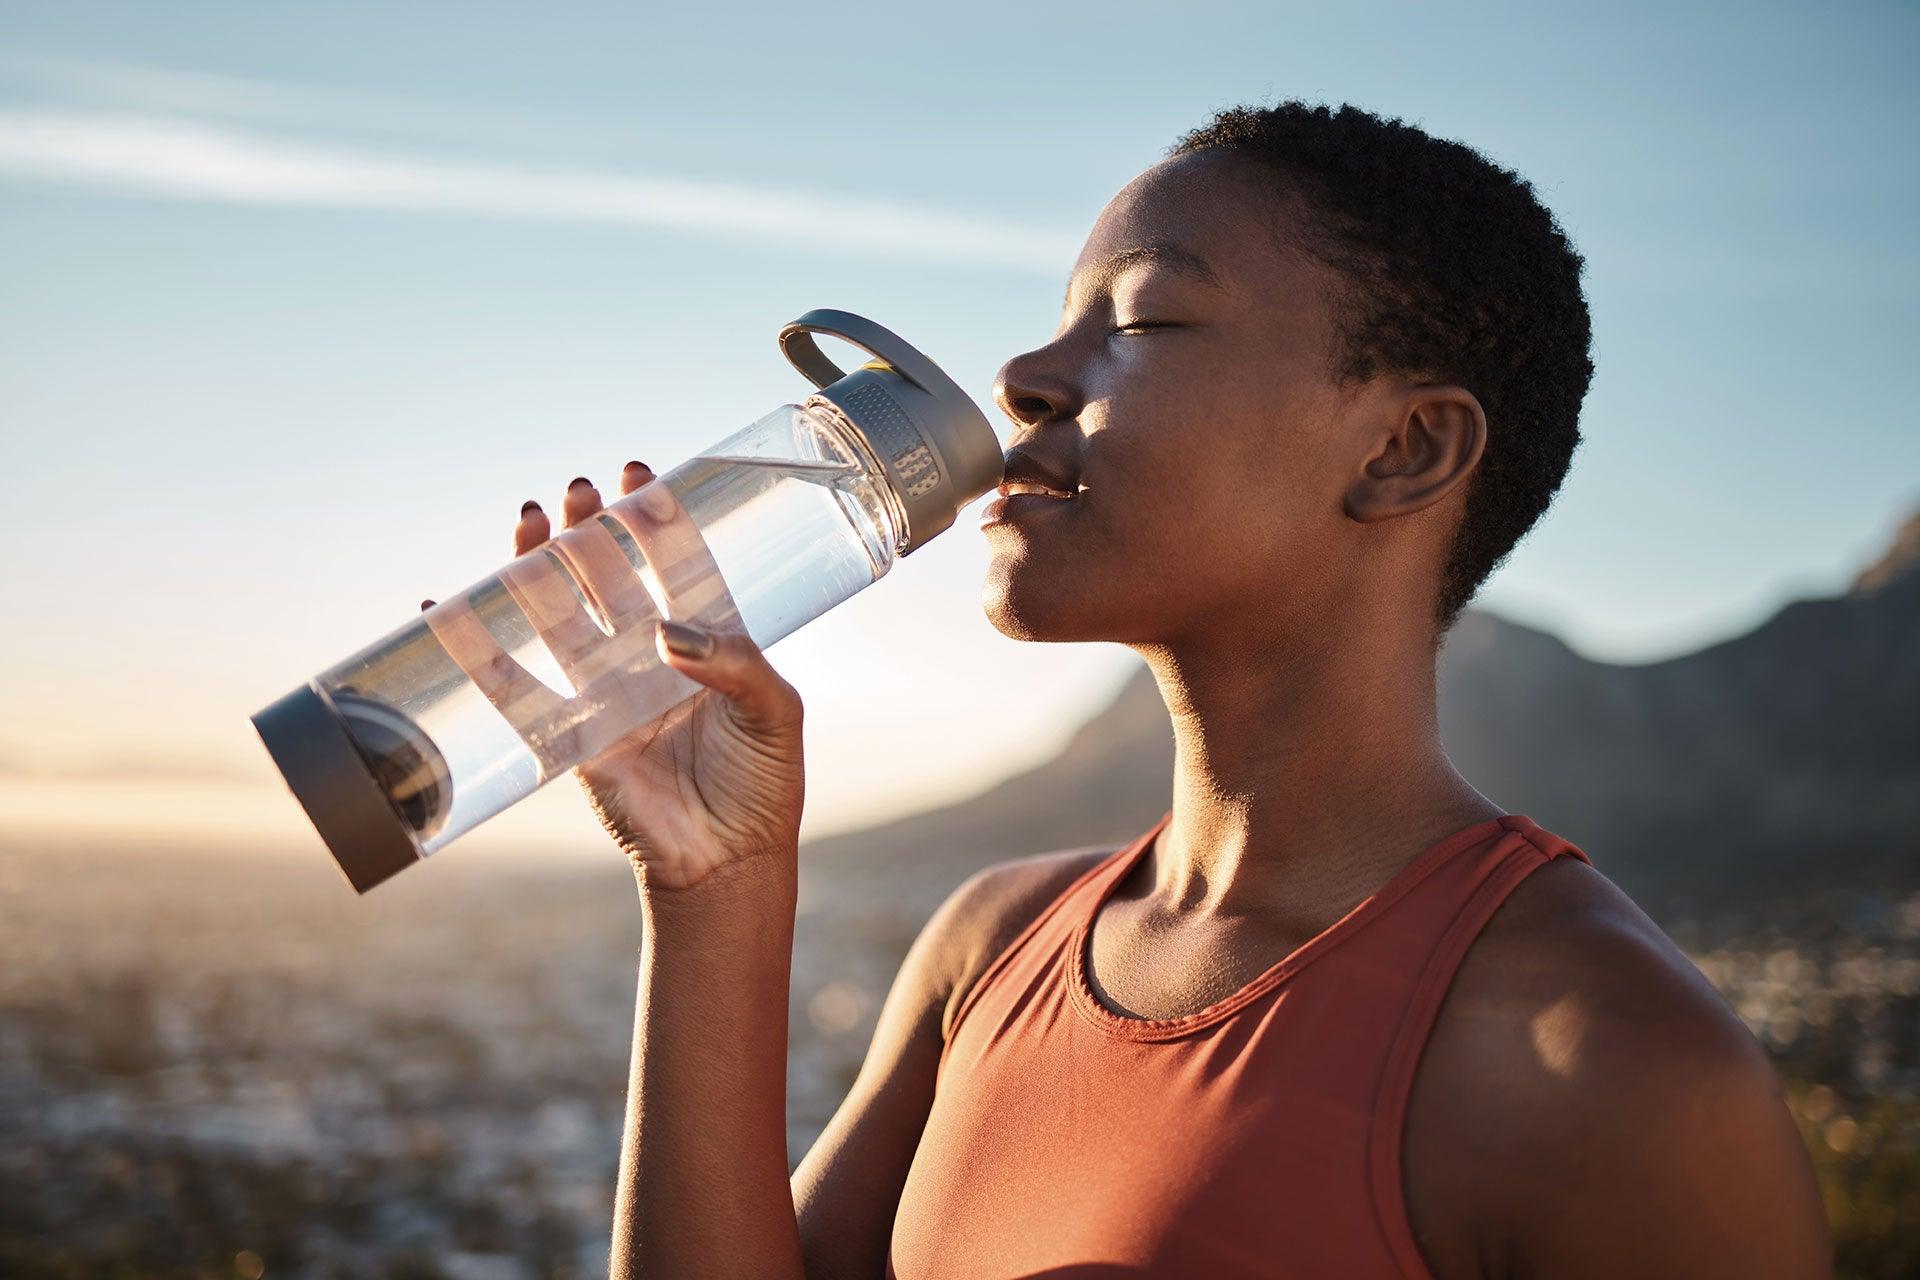 Fit female breaking to drink from water bottle during outdoor workout